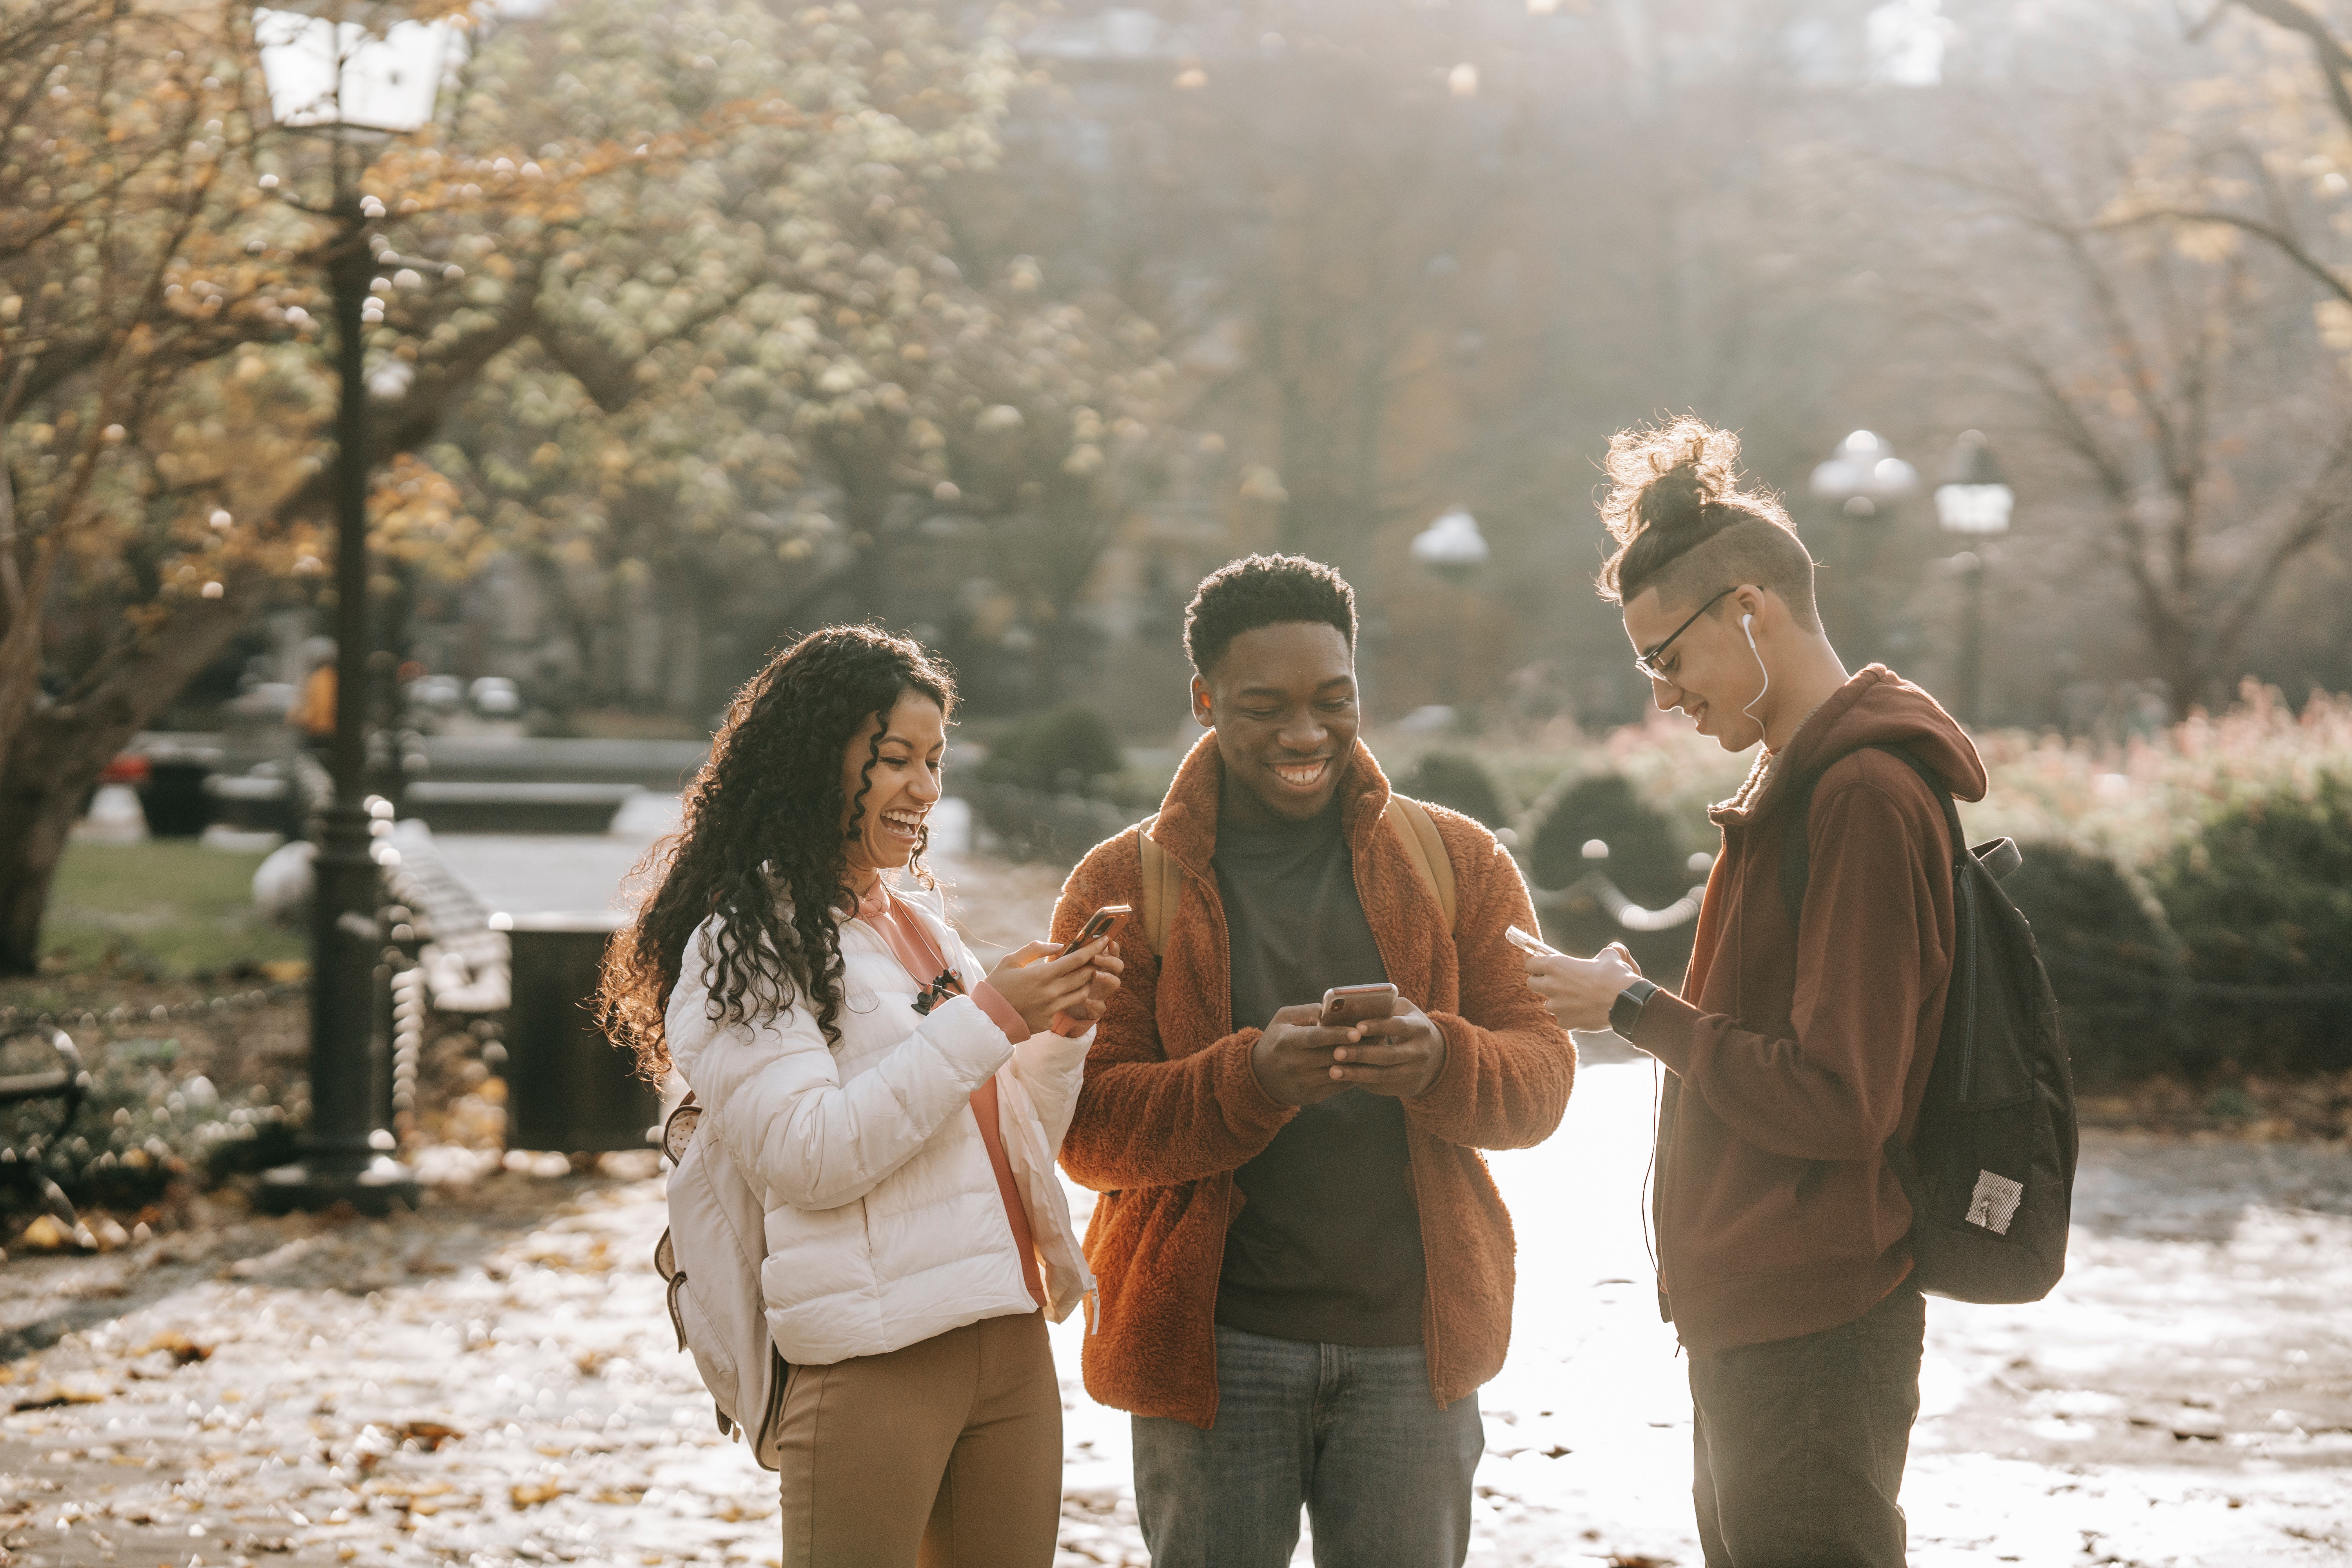 3 young people laughing while engaging with something on their phones and each other